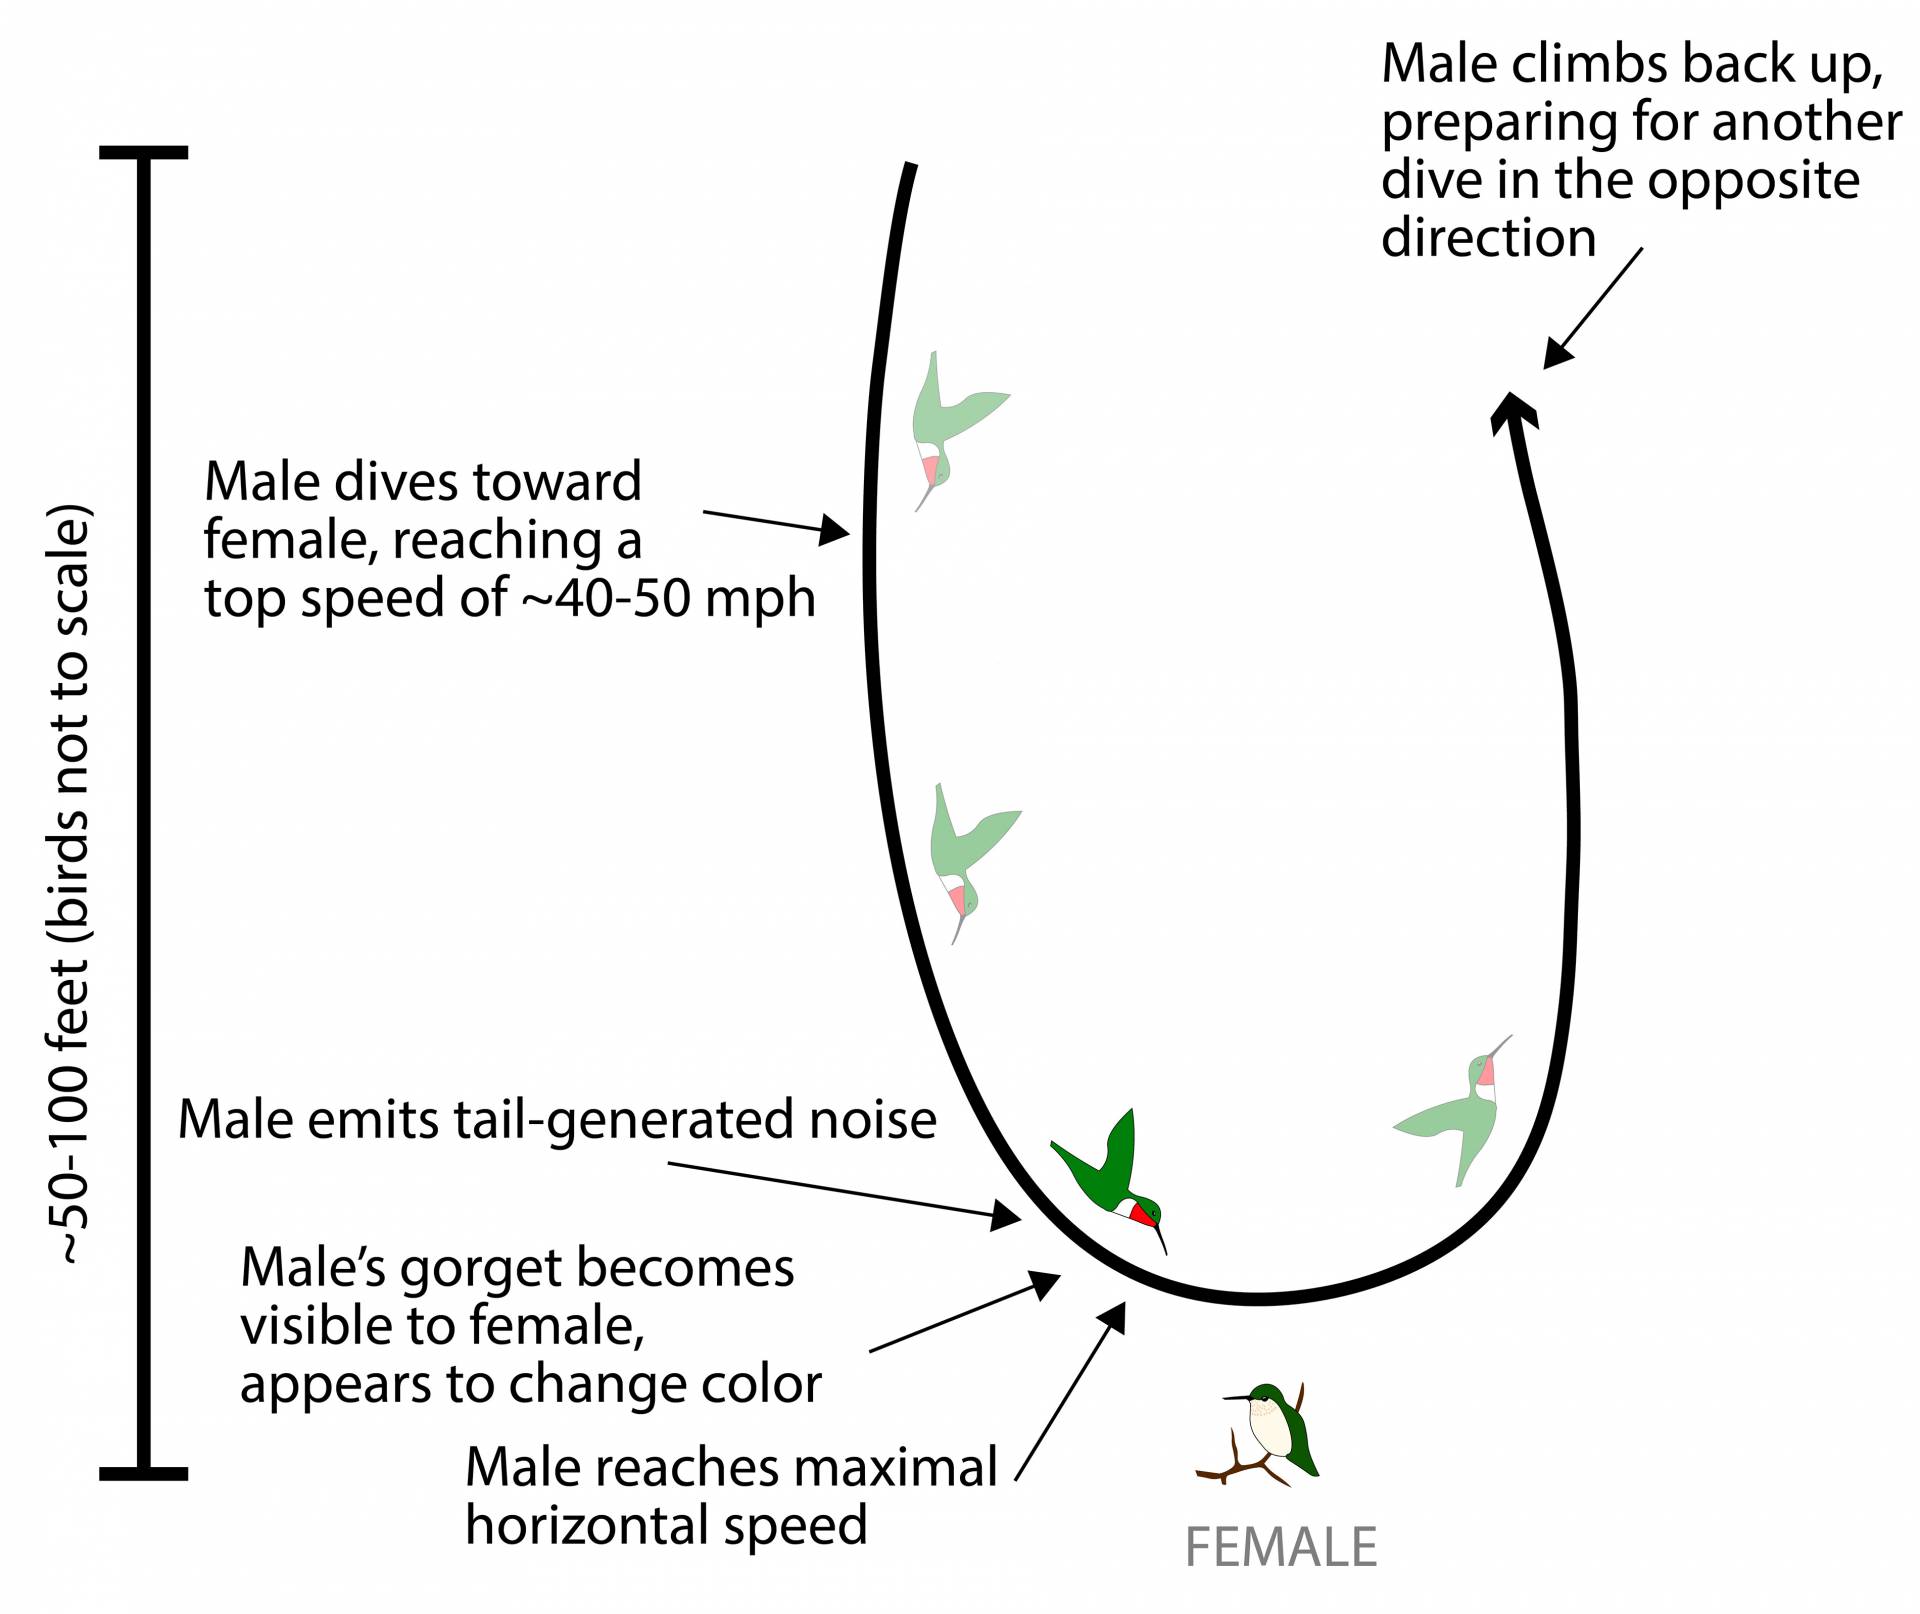 Illustration of the flight pattern and courtship rituals of hummingbirds "Male dives toward female, reaching a top speed of ~40-50 mph" "Male emits tail-generated noise" "Male's gorget becomes visible to female, appears to change color" "Male reaches maximal horizontal speed [towards female]" "Male climbs back up, preparing for another dive in the opposite direction"